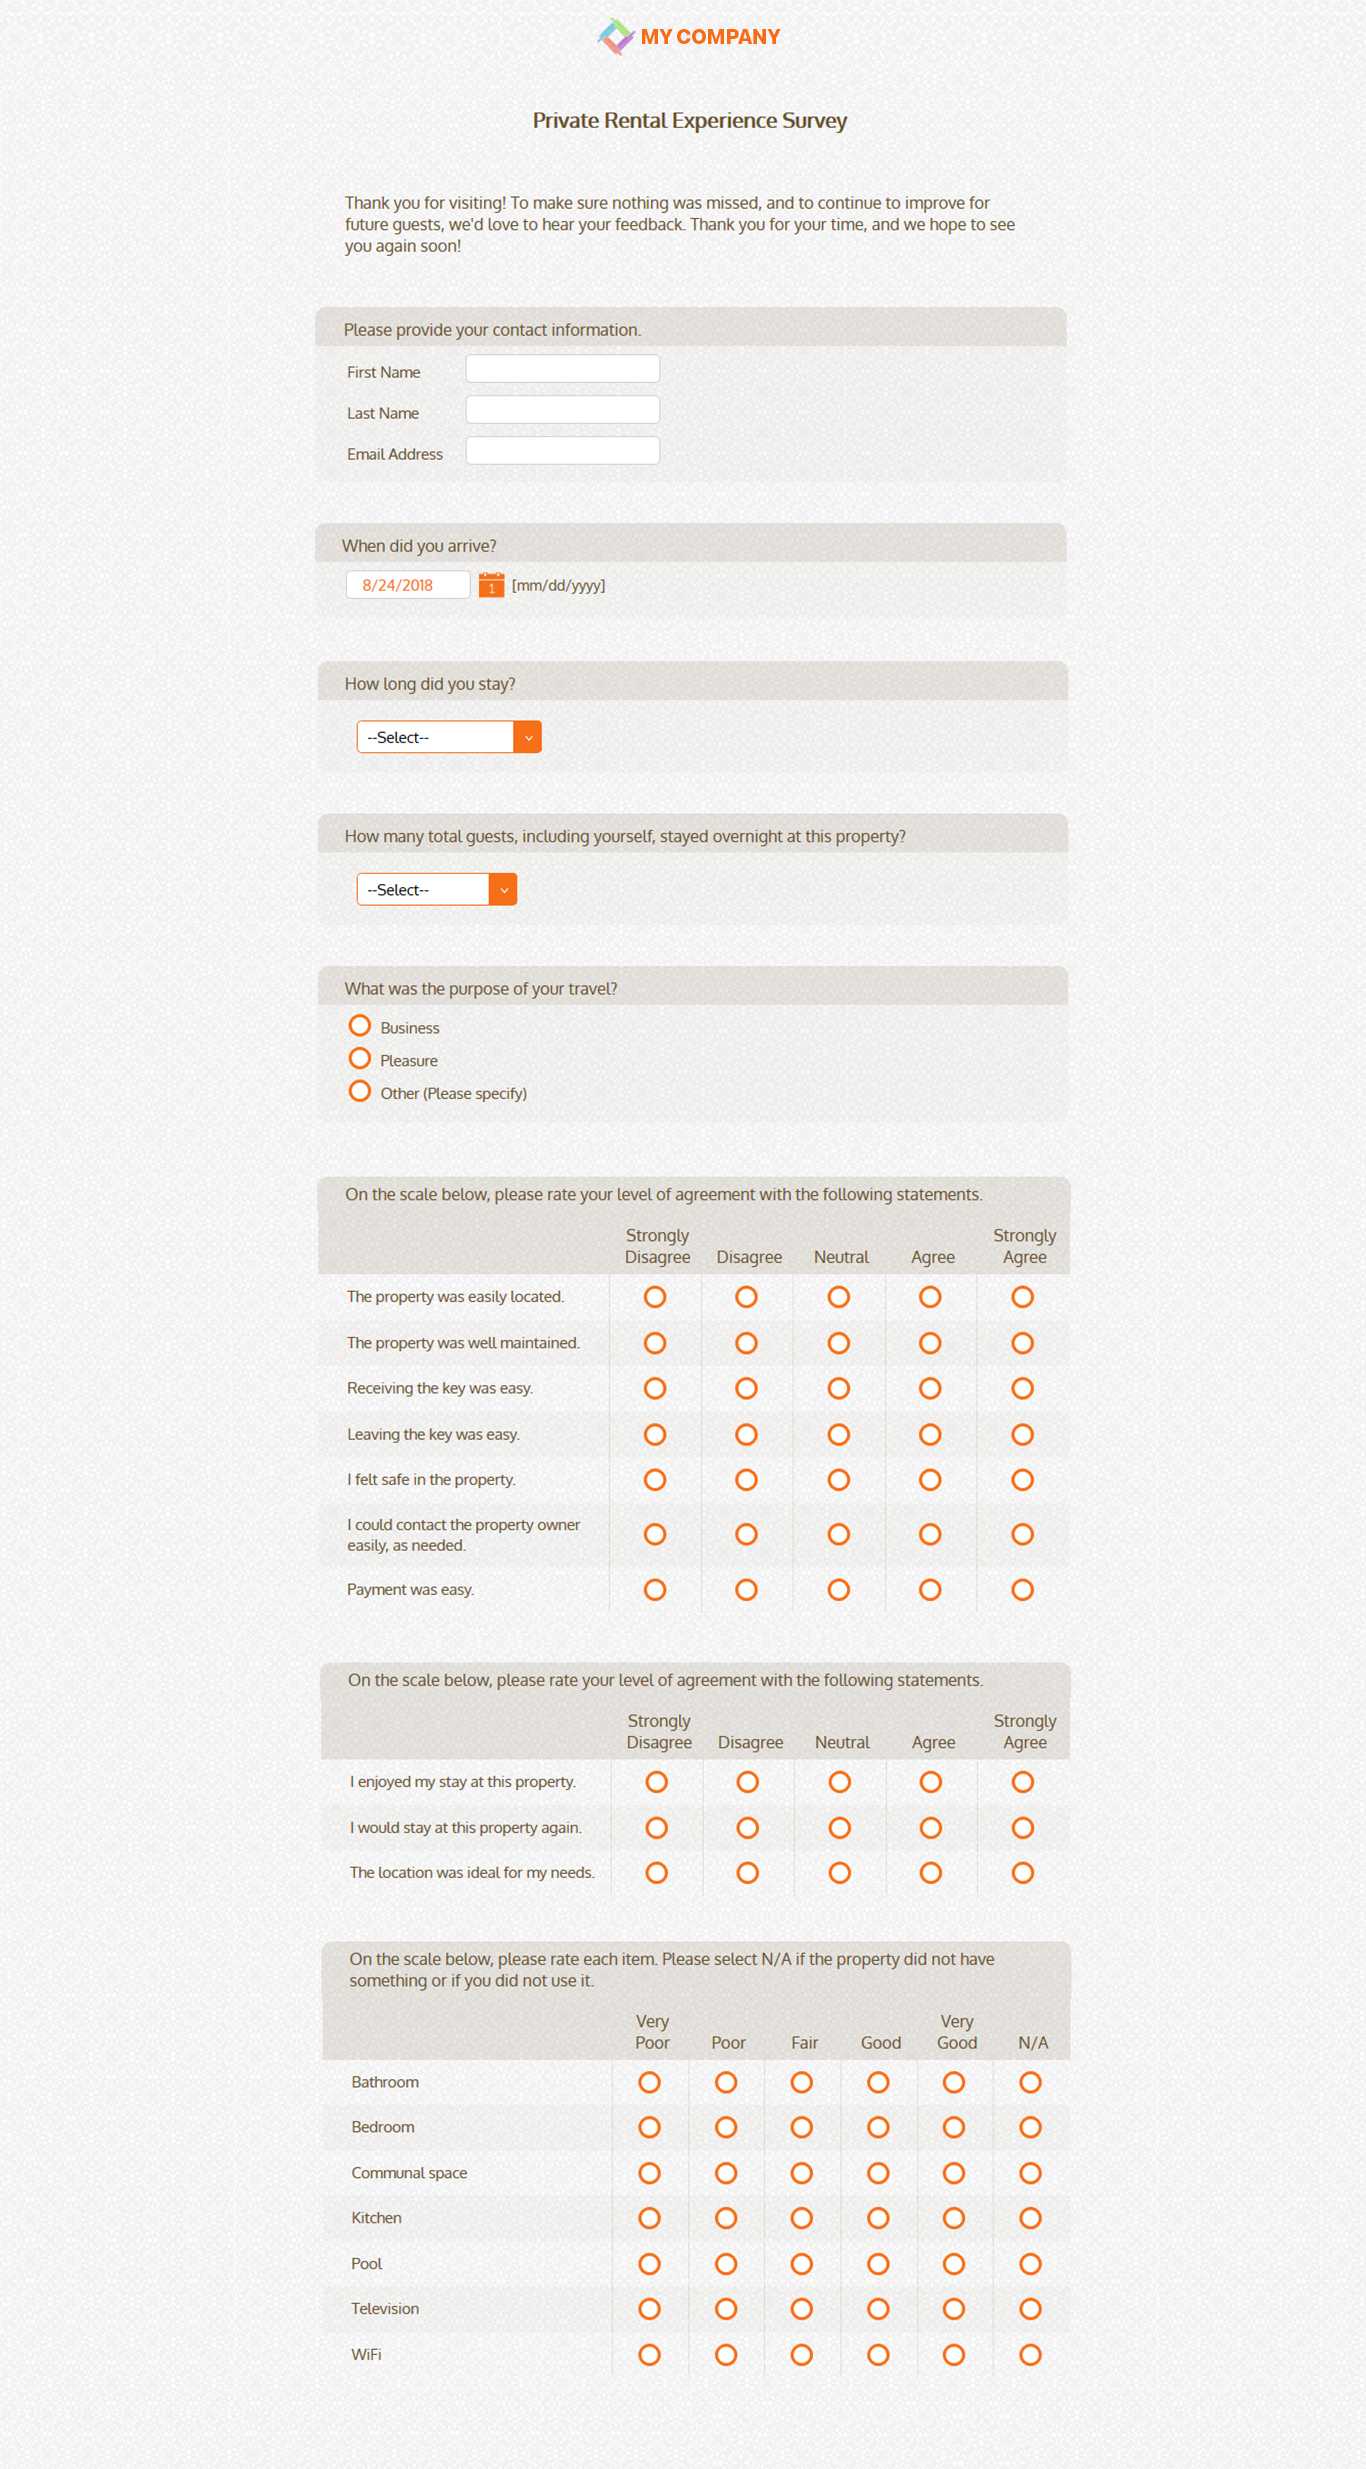 Rental Experience Survey Template [12 Questions] | Sogosurvey Within Poll Template For Word